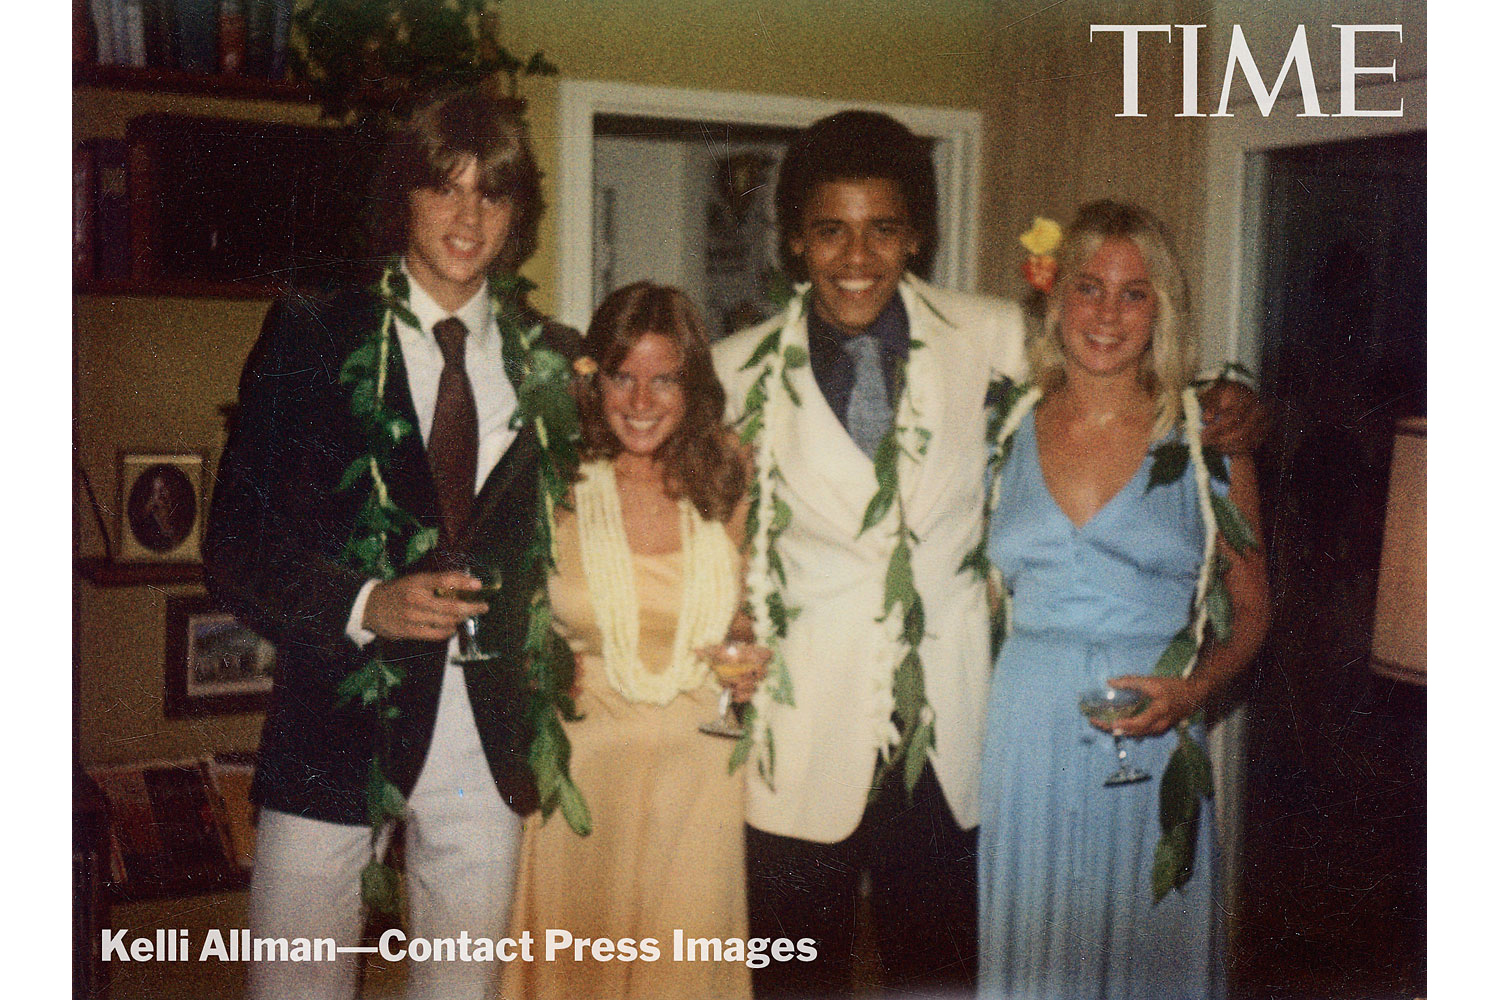 From left: Greg Orme, Kelli Allman, Barack Obama and Megan Hughes at Allman’s parents’ house in Honolulu. (Kelli Allman / Contact Press Images)